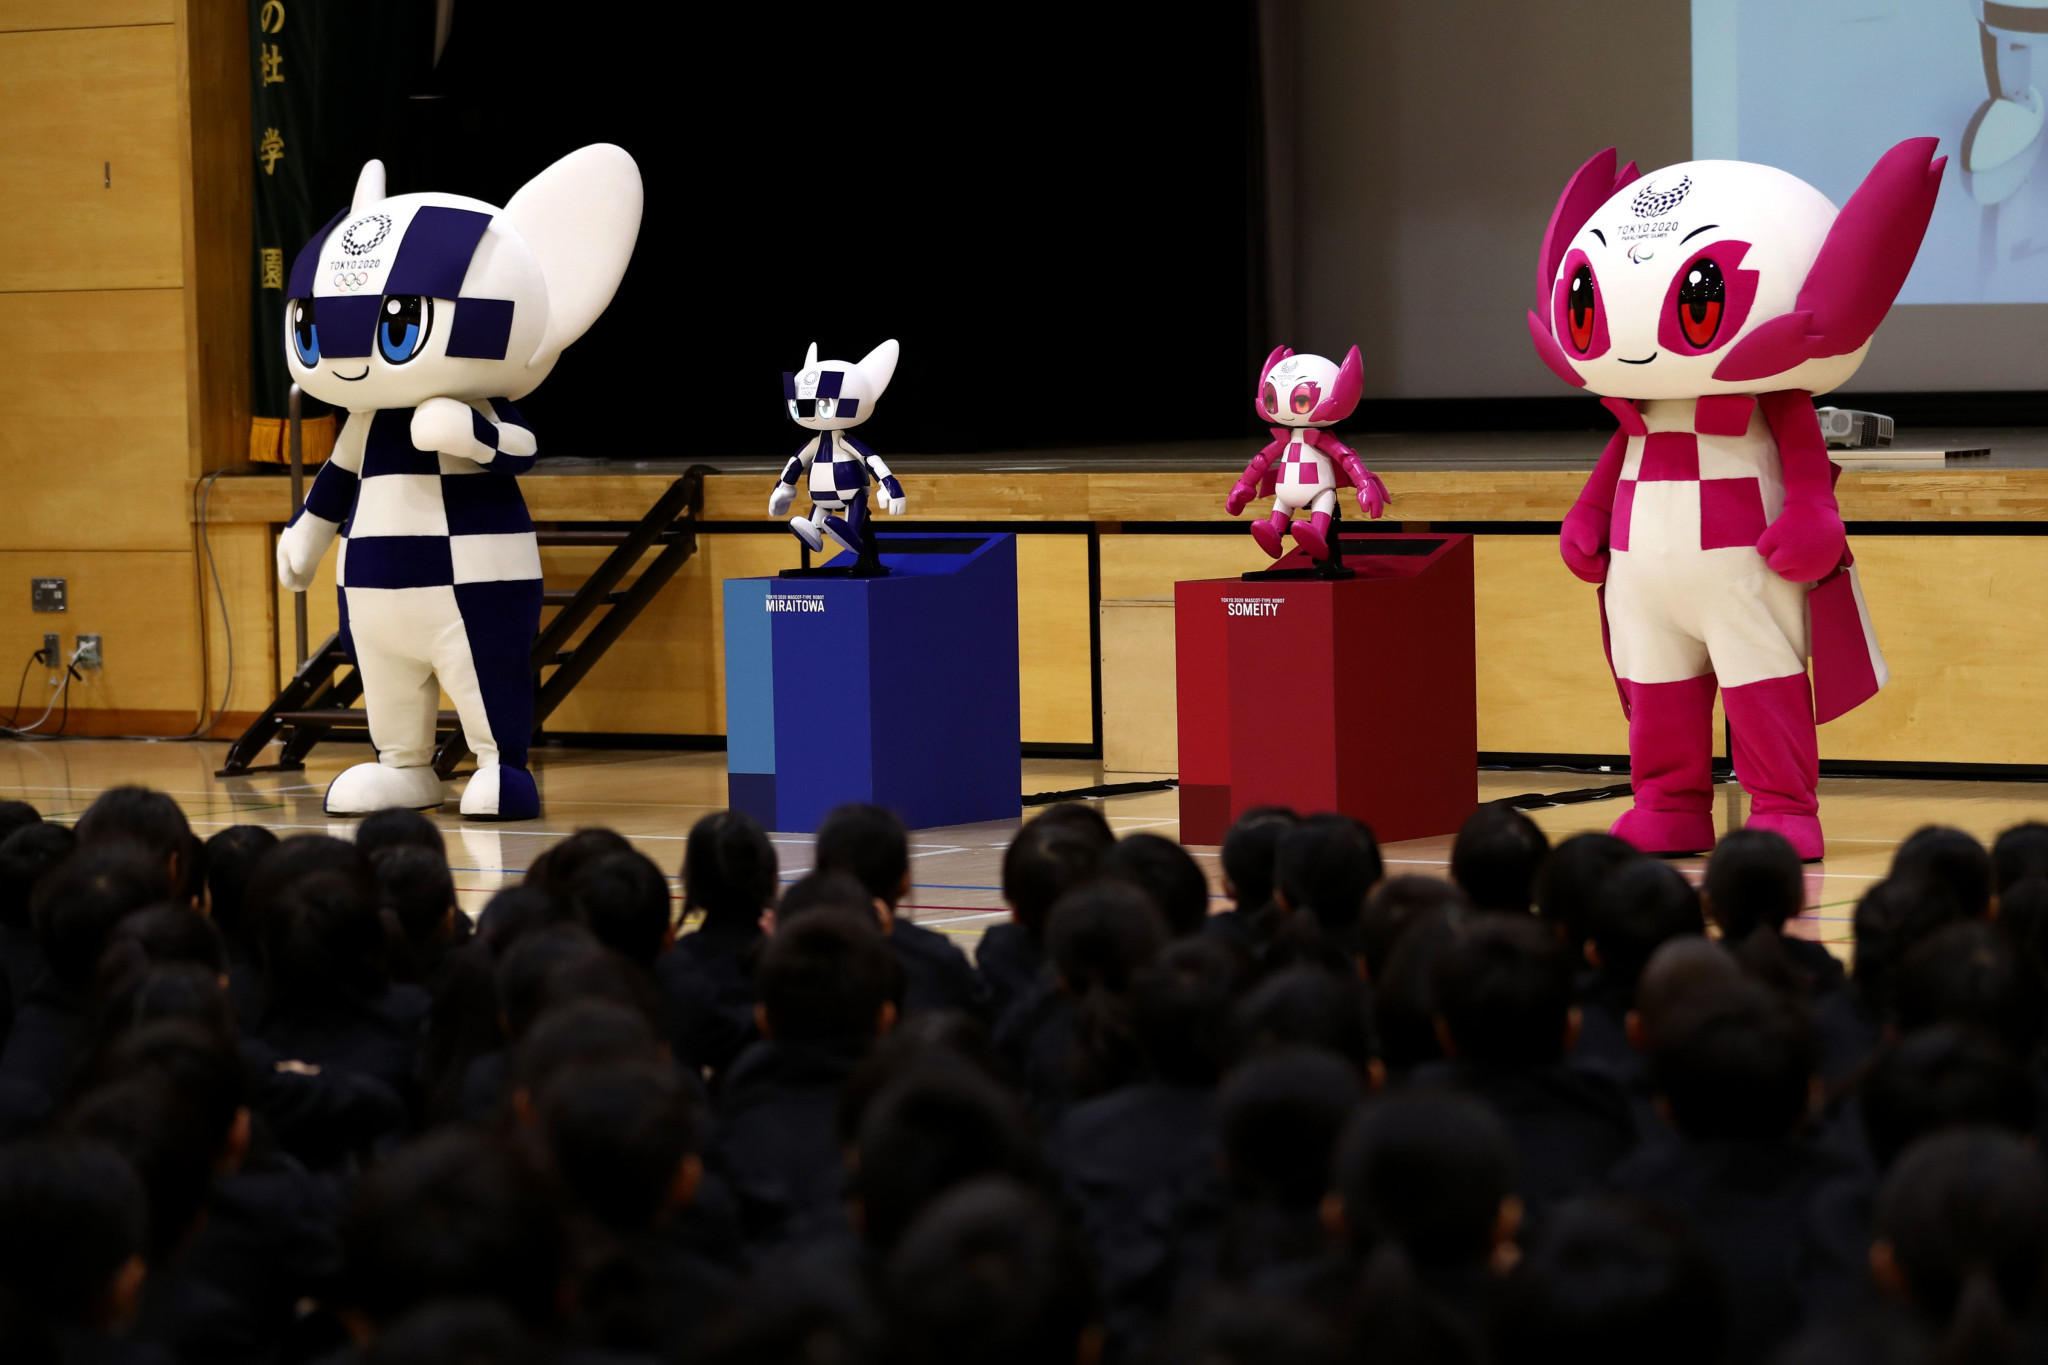 Tokyo 2020's mascot robots were demonstrated at an elementary school ©Getty Images